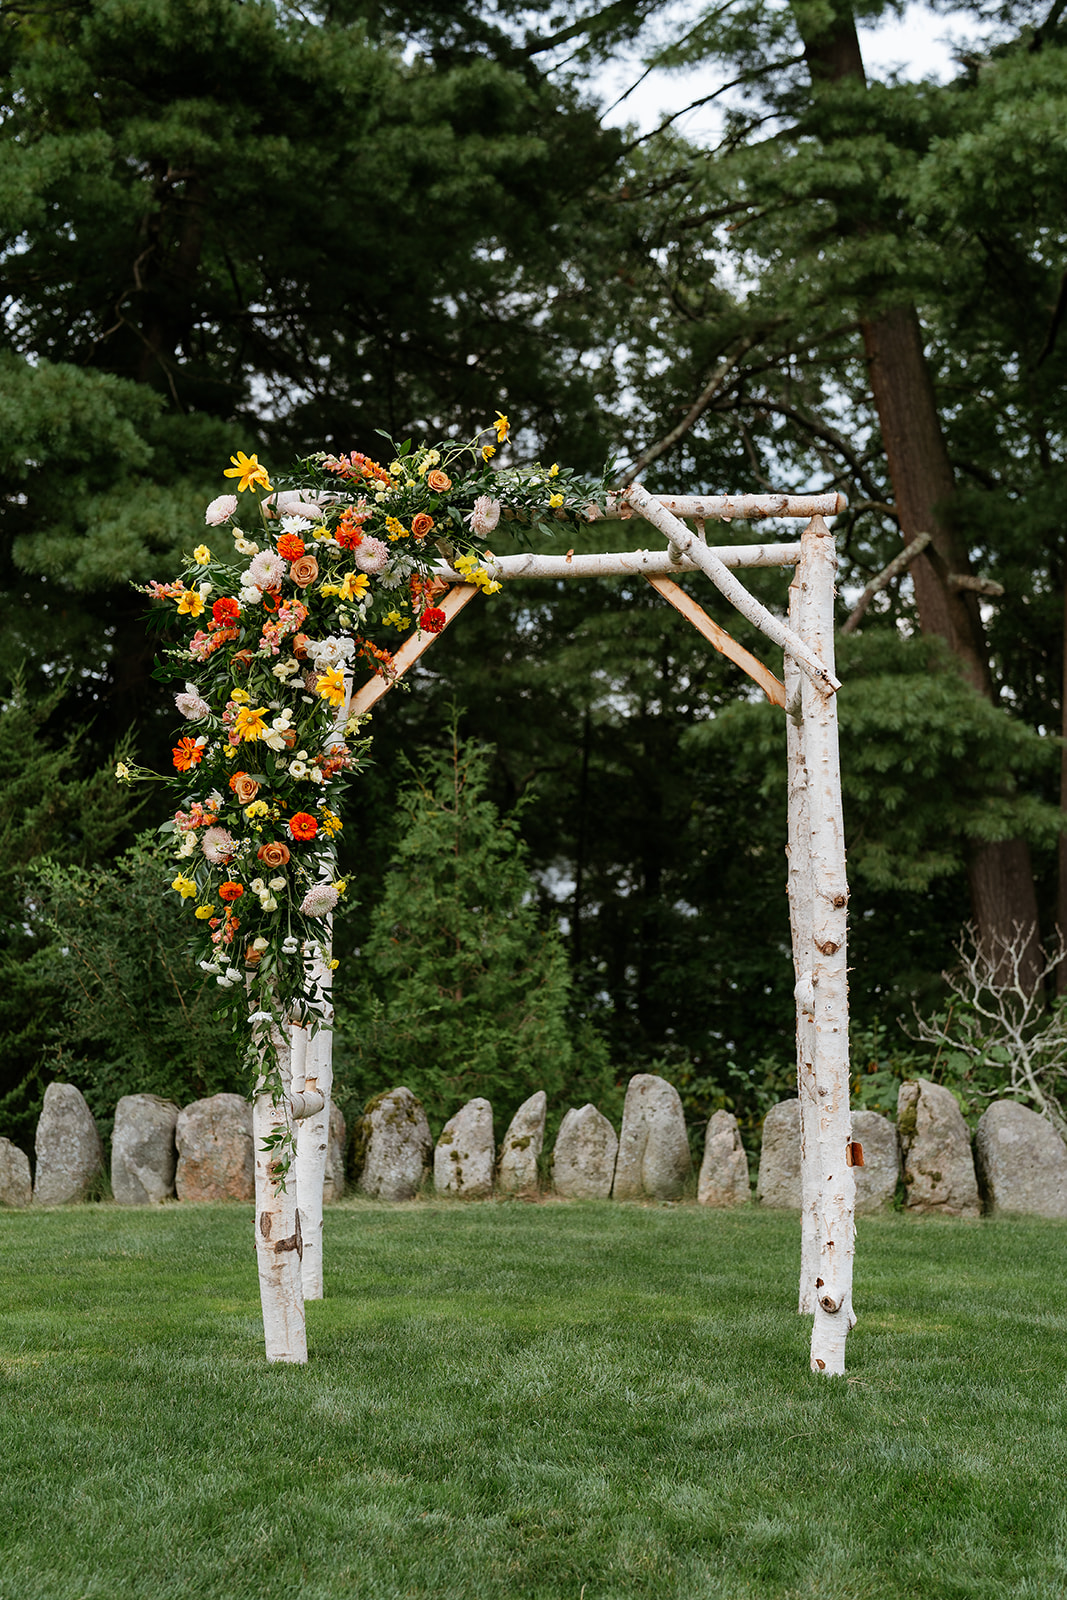 Outdoor wedding ceremony setup with white chairs and a floral arch against a backdrop of trees.